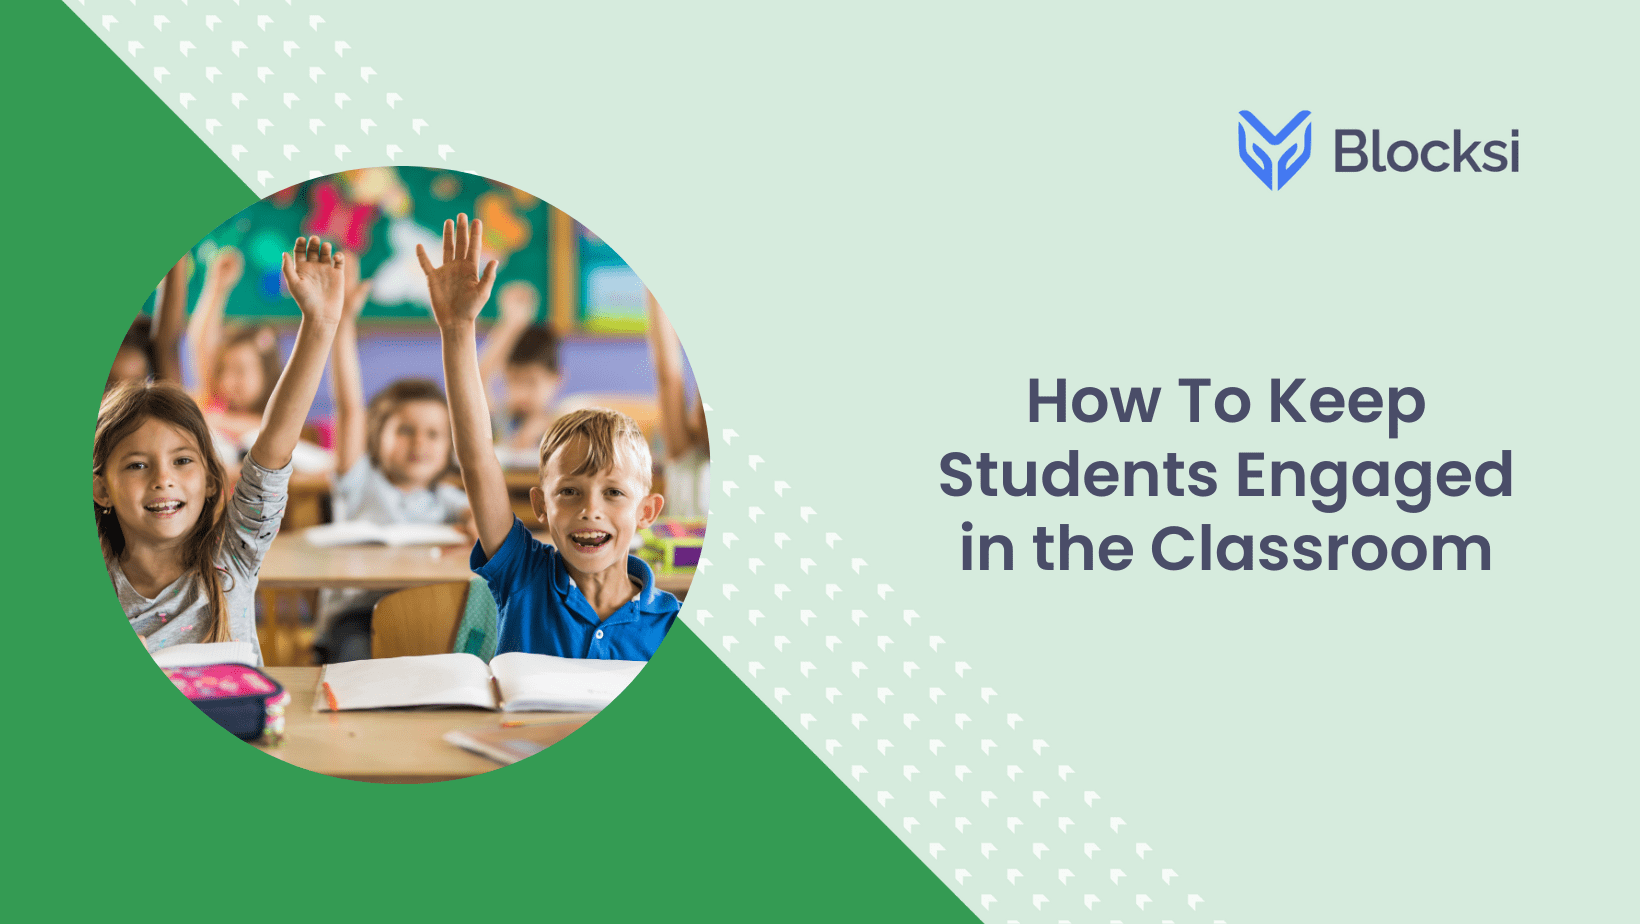 How To Keep Students Engaged in the Classroom